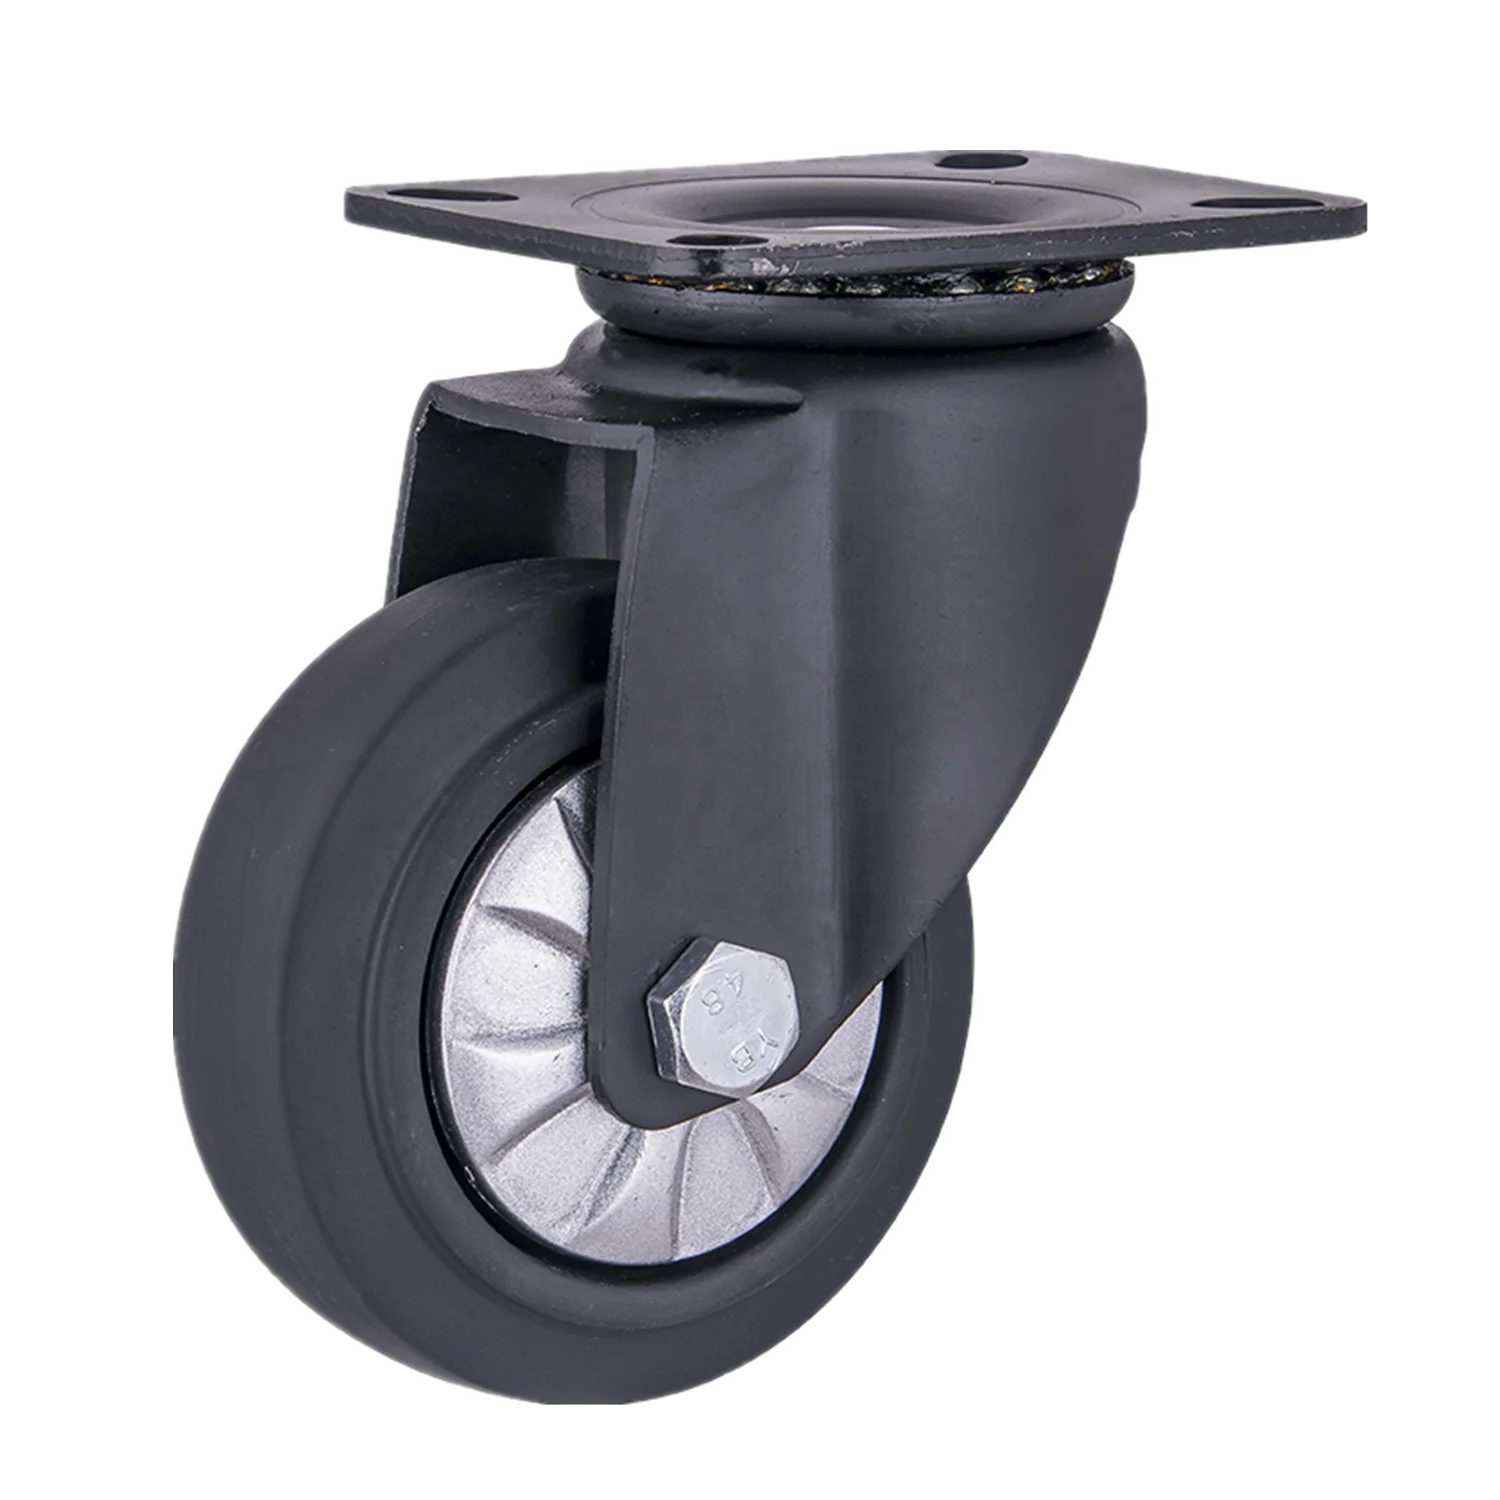 Full black high elastic rubber casters with electrophoresis bracket 3 inch castor wheel with double ball bearing